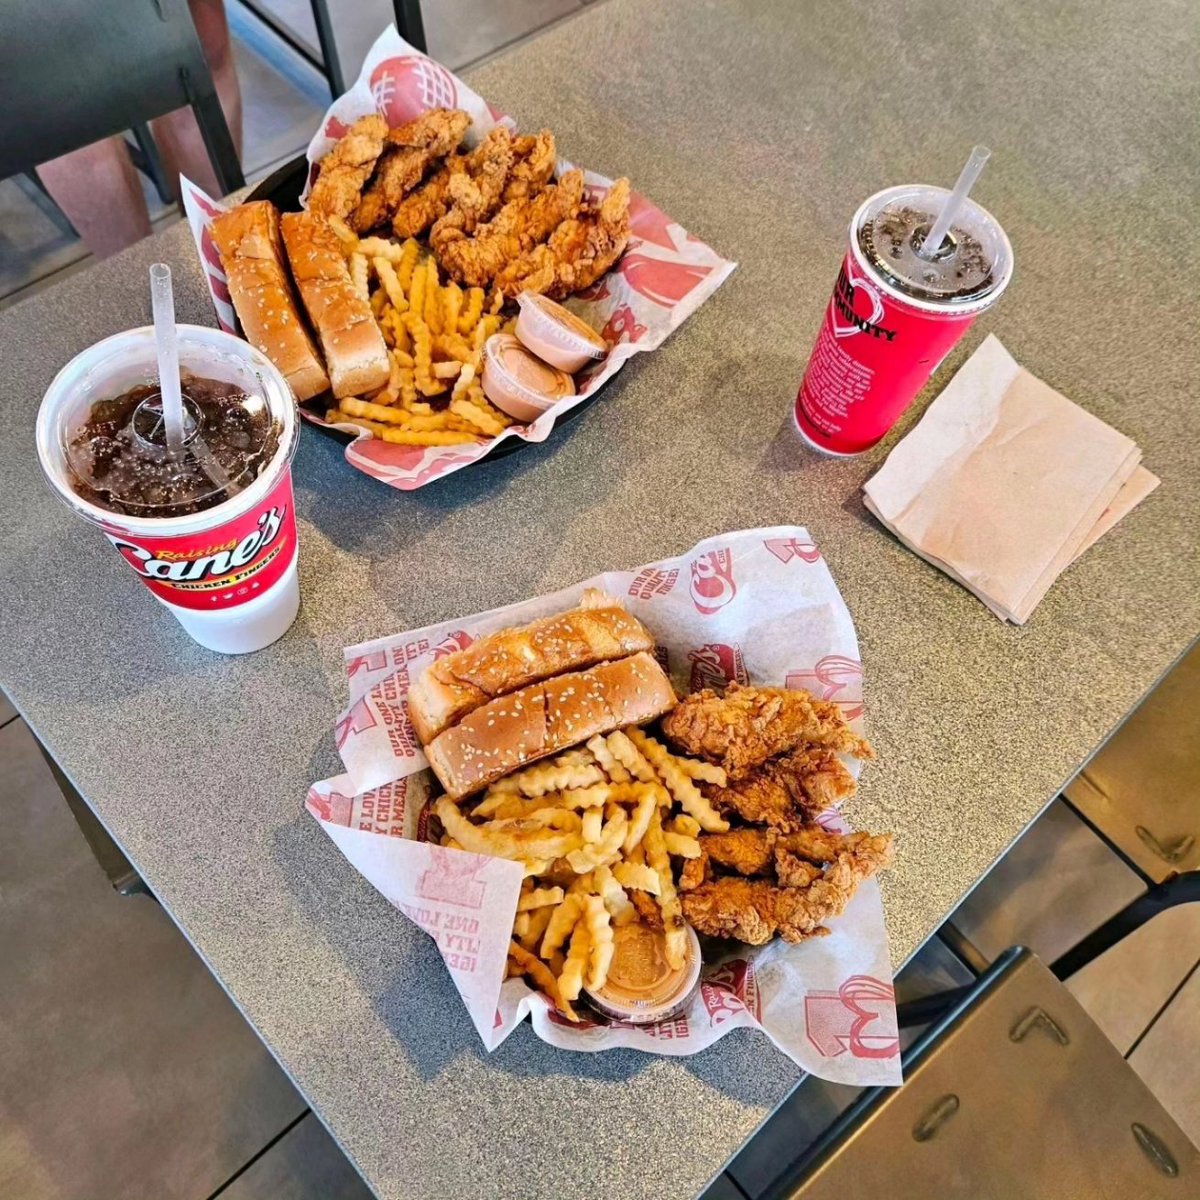 🎉Thankyou Raising Cane's Chicken in Stafford TX for sponsoring us, Directors Level! We are happy to have you as a sponsor of our mighty Viking Band!🙌 @DHS_Vikings @FBISDFineArts @DMSVIKINGBAND